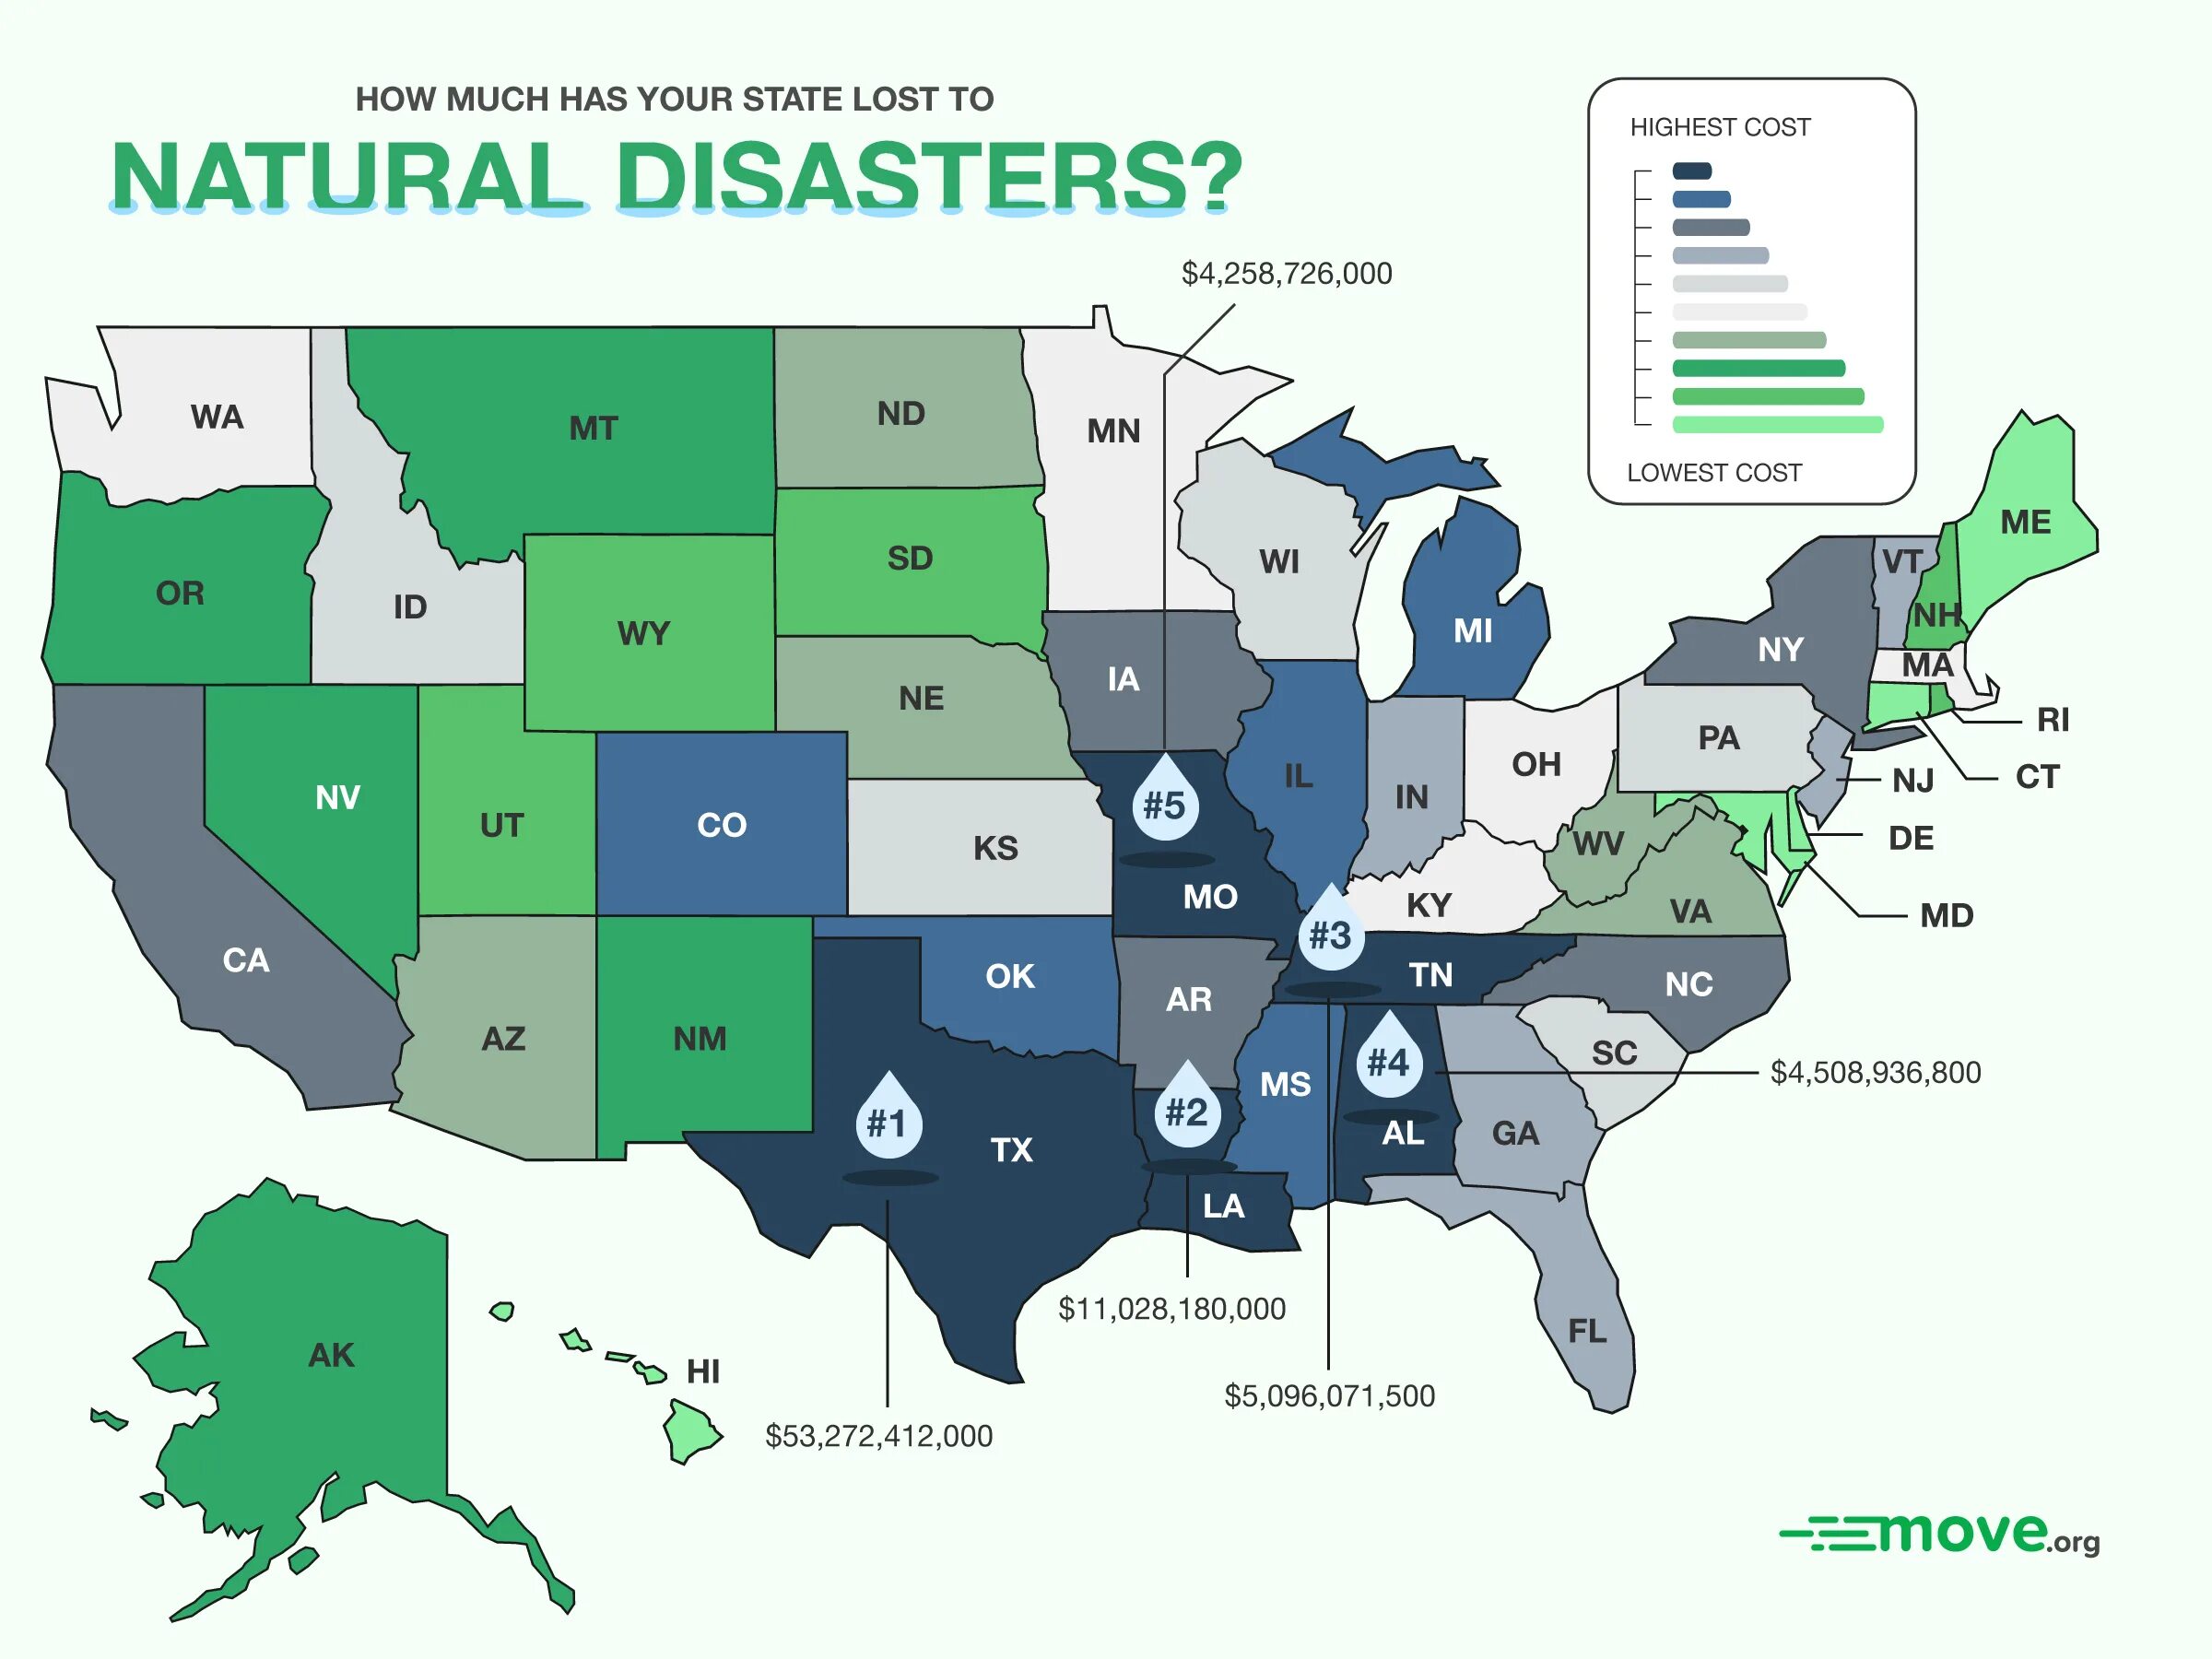 Natural Disasters reading. Стихийные бедствия на английском языке. Natural Disasters in the United States.